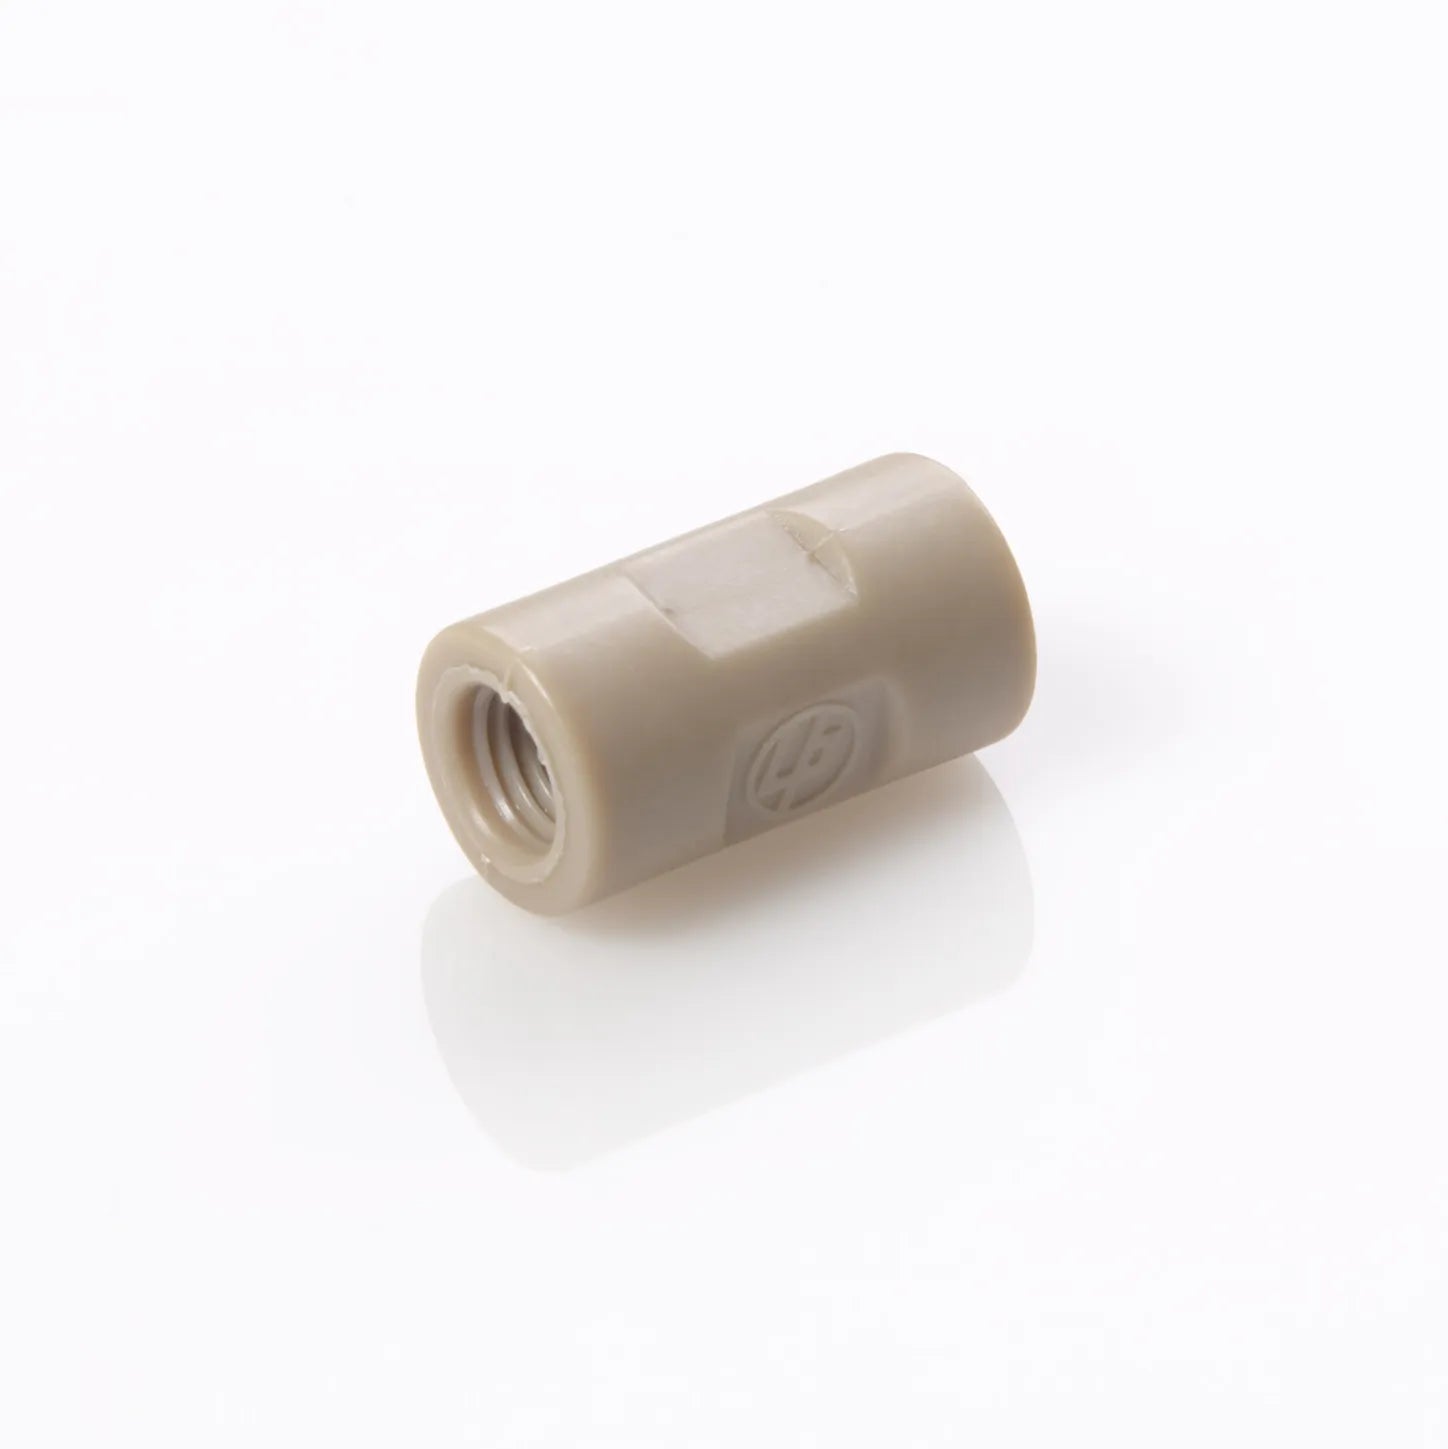 Connector Union PEEK™ 0.020" (0.50mm) Thru-Hole with 1/4-28 Ports (Union Body Only)